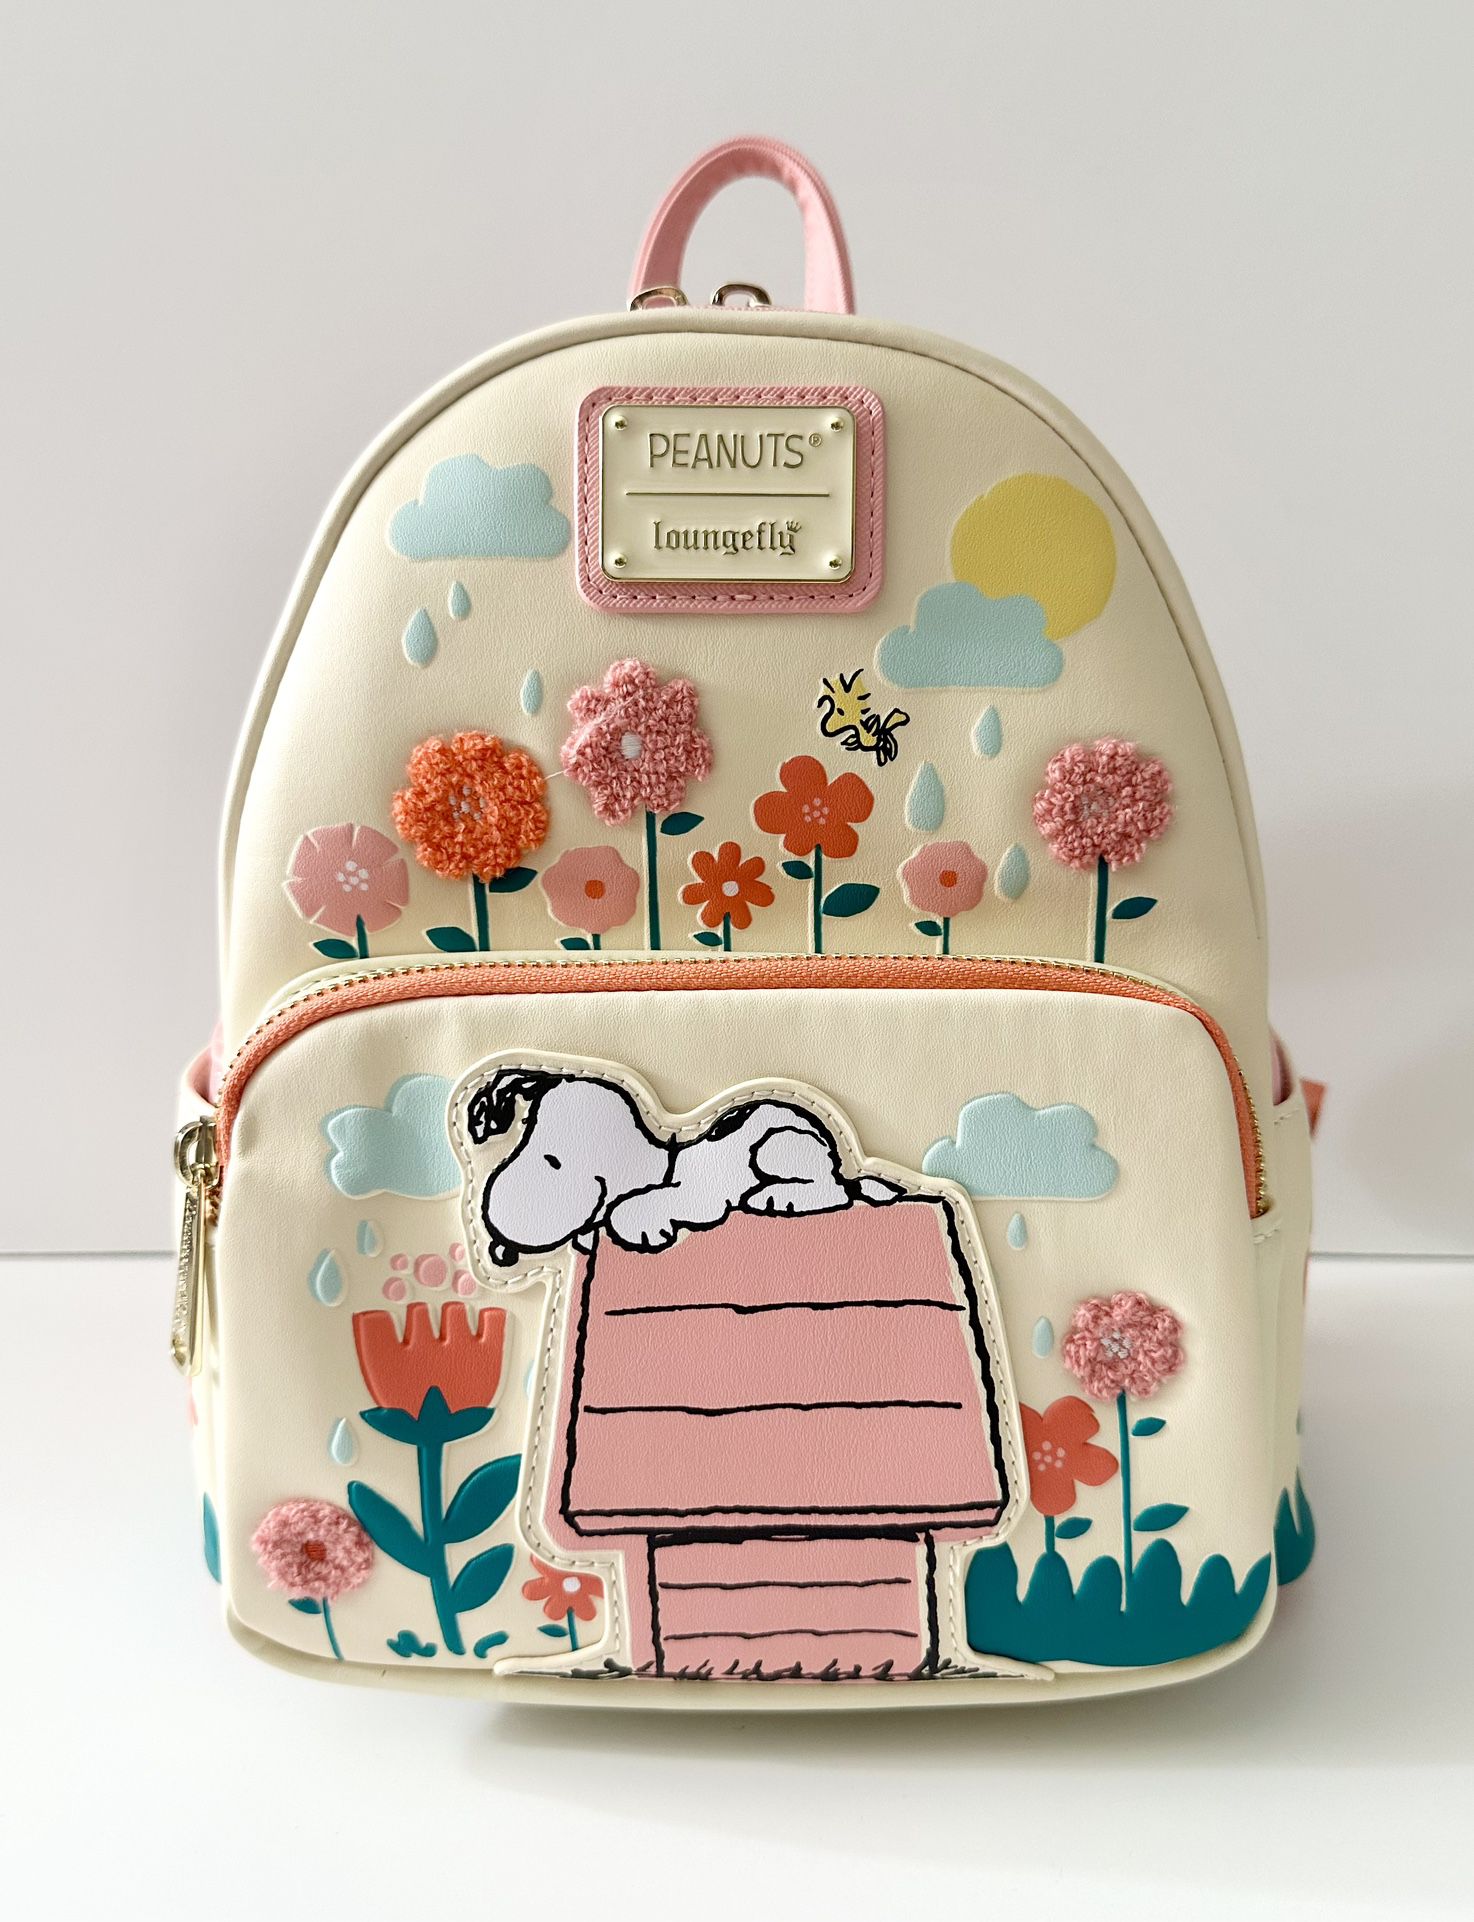 BRAND NEW WITH TAGS PEANUTS SNOOPY DOGHOUSE FLORAL LOUNGEFLY MINI BACKPACK FOR SALE. 